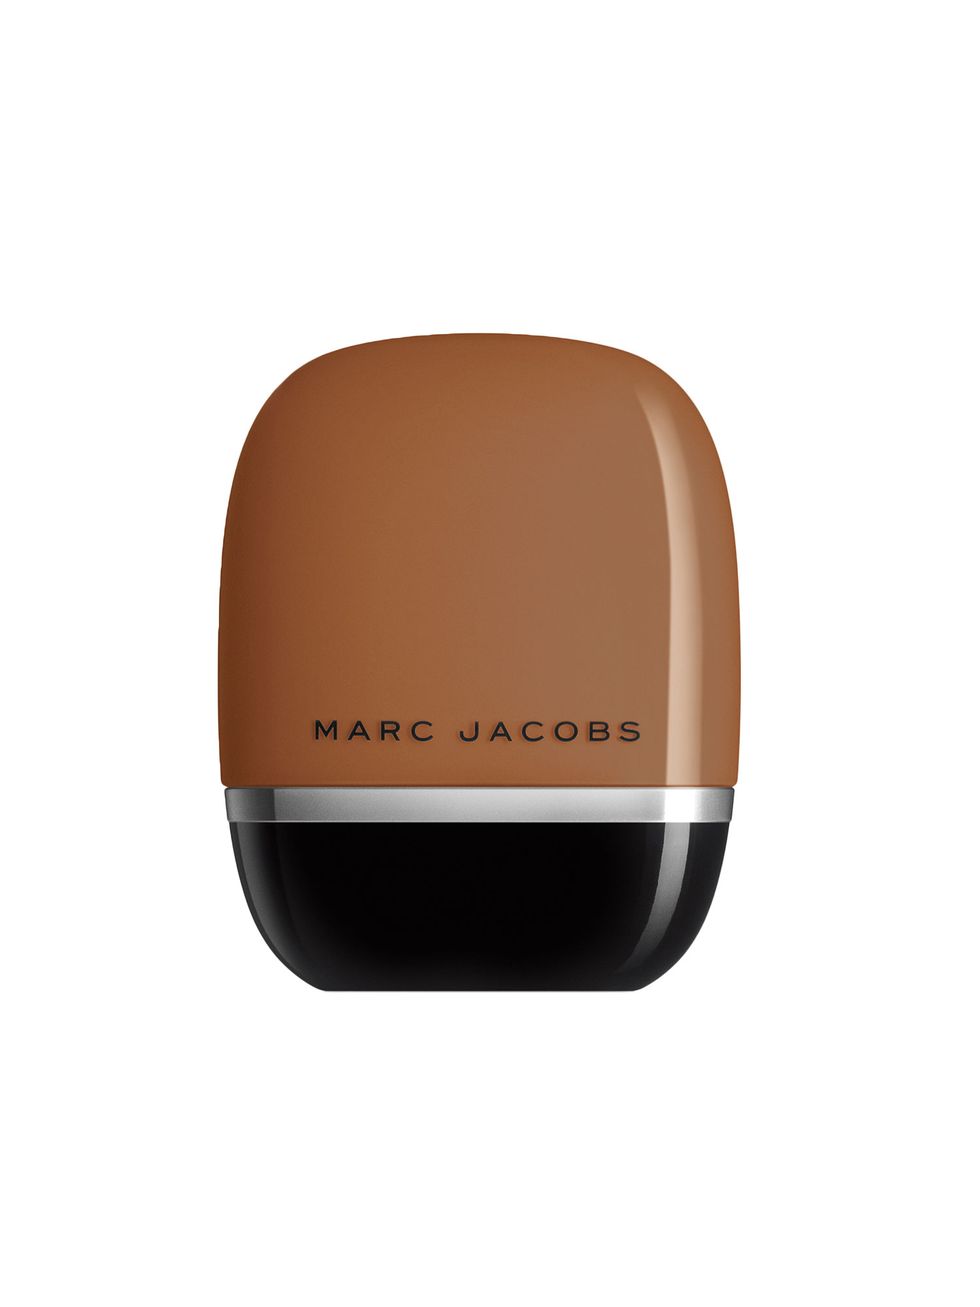 Marc Jacobs Beauty Shameless Youthful-Look 24H Foundation